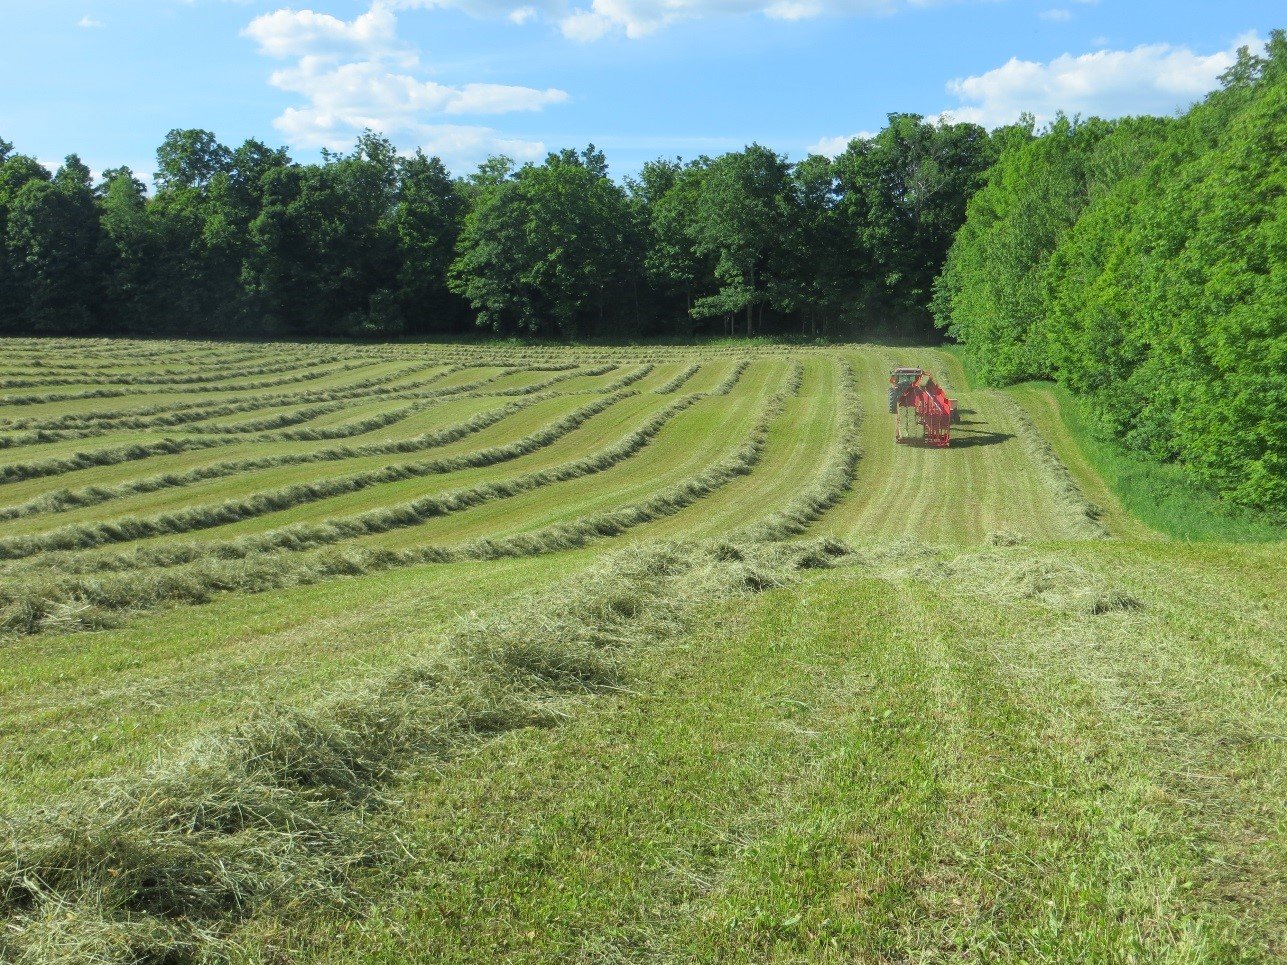 REVIEW — A farmer is shown cutting hay in a field in this file photo. The Oneida County Agricultural and Farmland Protection Board will be wrapping up its New York State Certified Agricultural District 5 required eight-year review. District 5 includes properties within the towns of Kirkland, New Hartford, Westmoreland and Whitestown. This is a voluntary program and applications should be sent before March 31 to Oneida County Planning Department, 321 Main St., Utica, NY 13501.